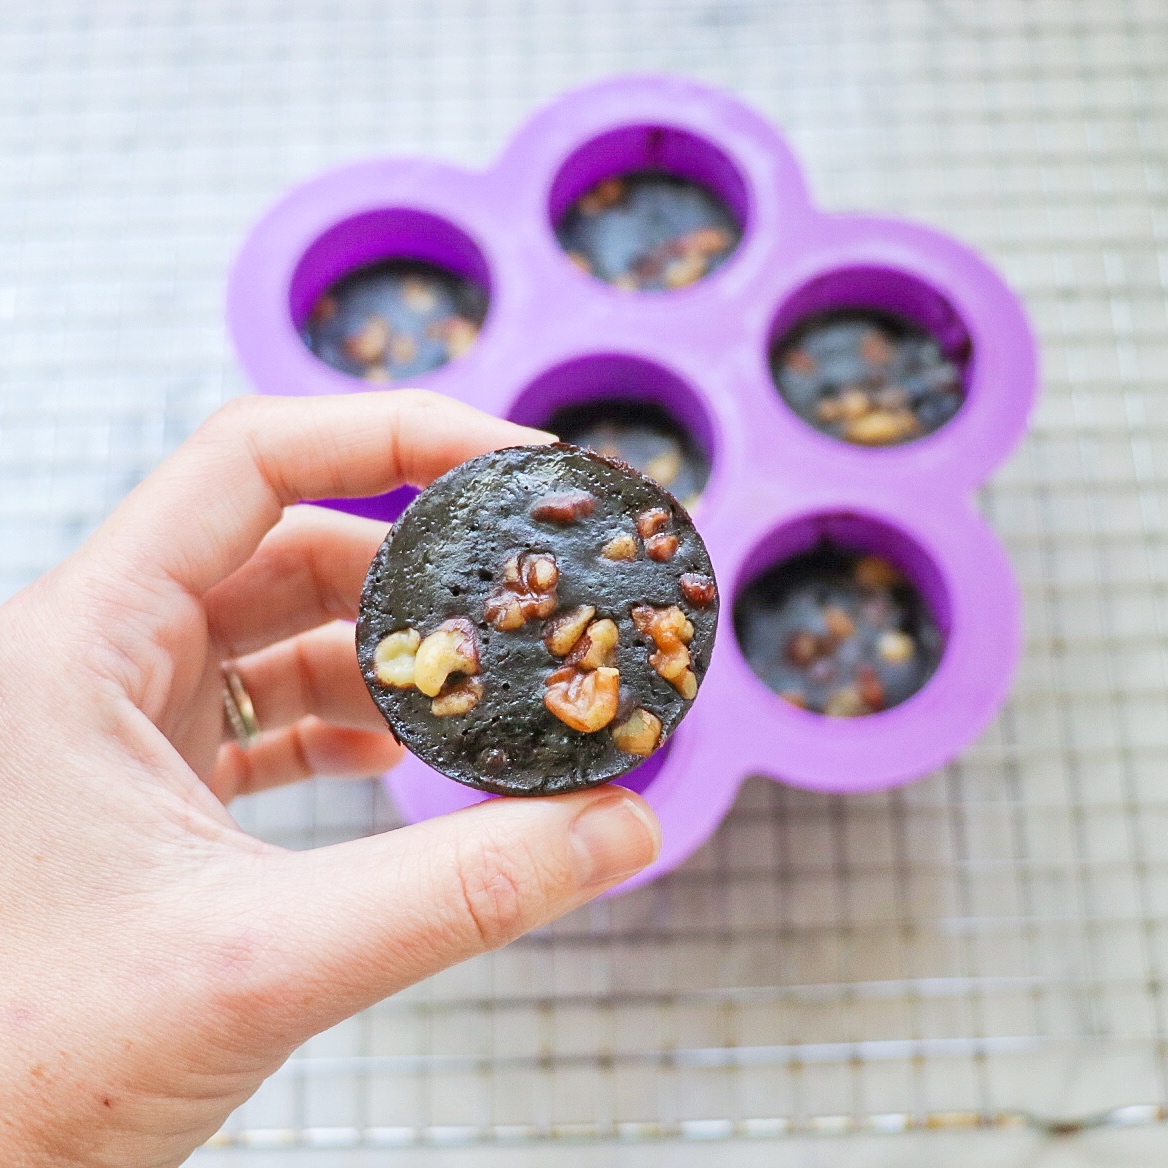 Silicone egg bites mold brownie recipes: Instant Pot Brownie Bites